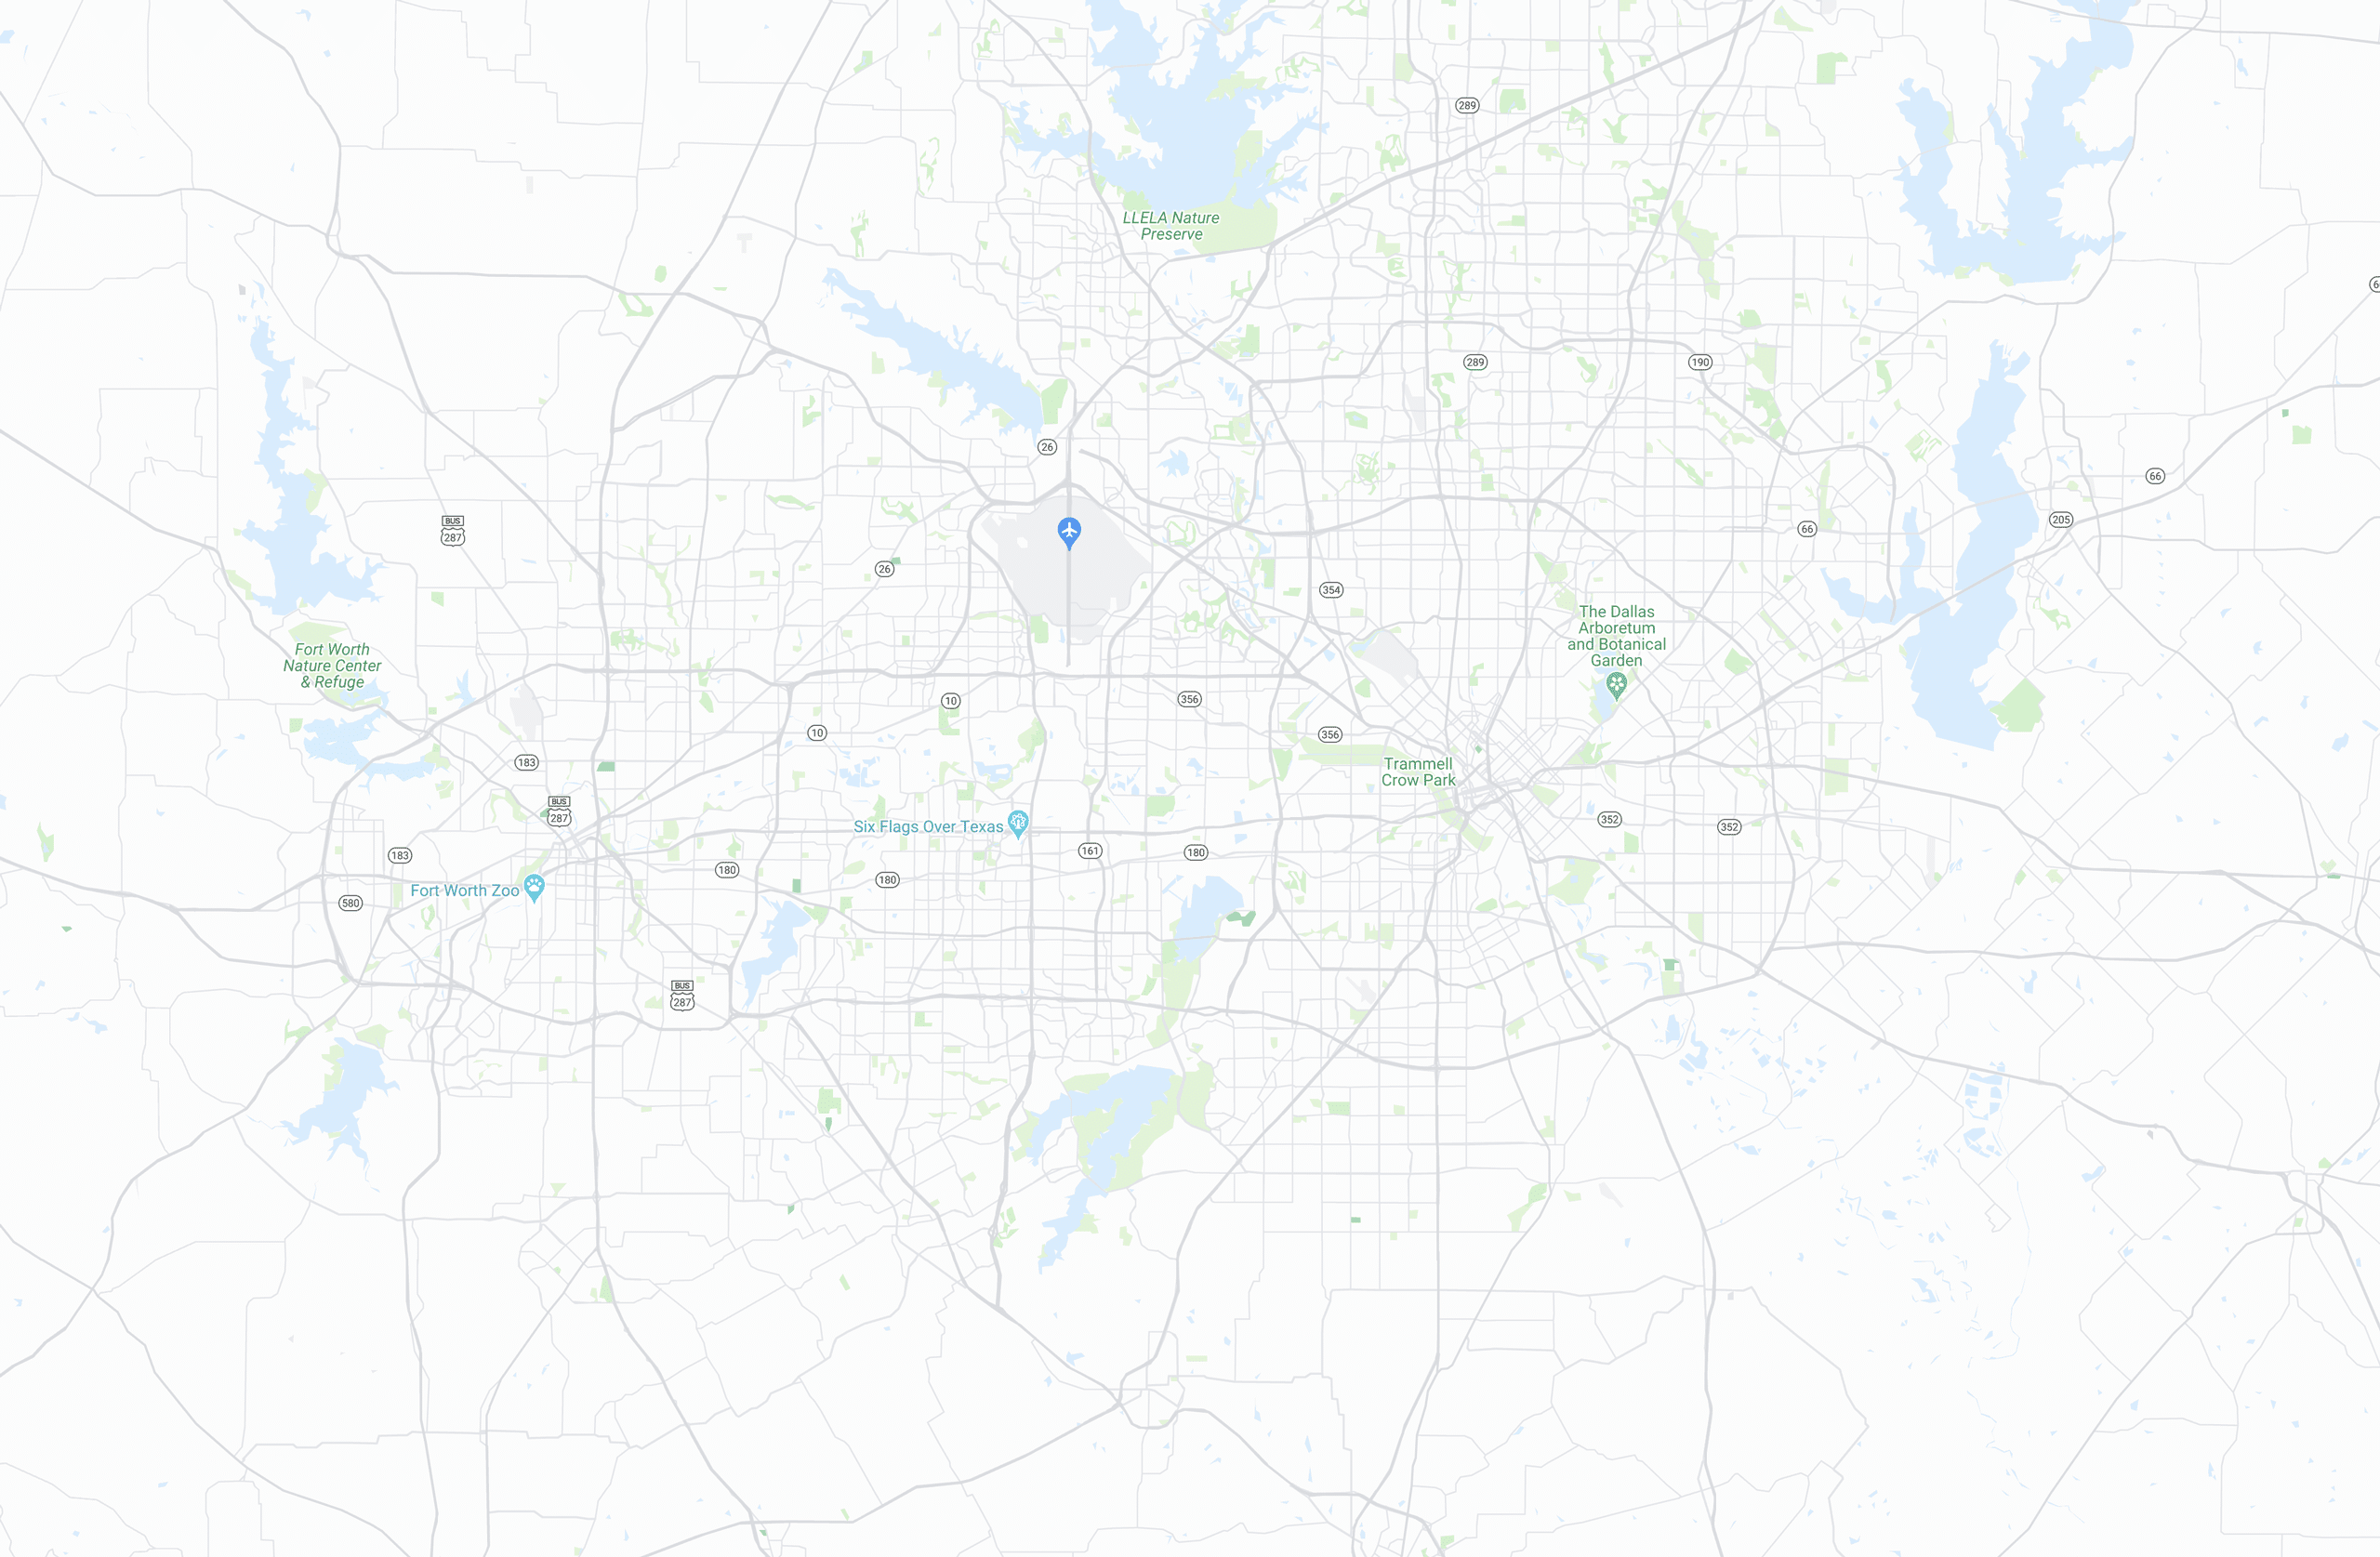 Vector illustration of a map of the Dallas-Fort Worth metroplex in Texas.